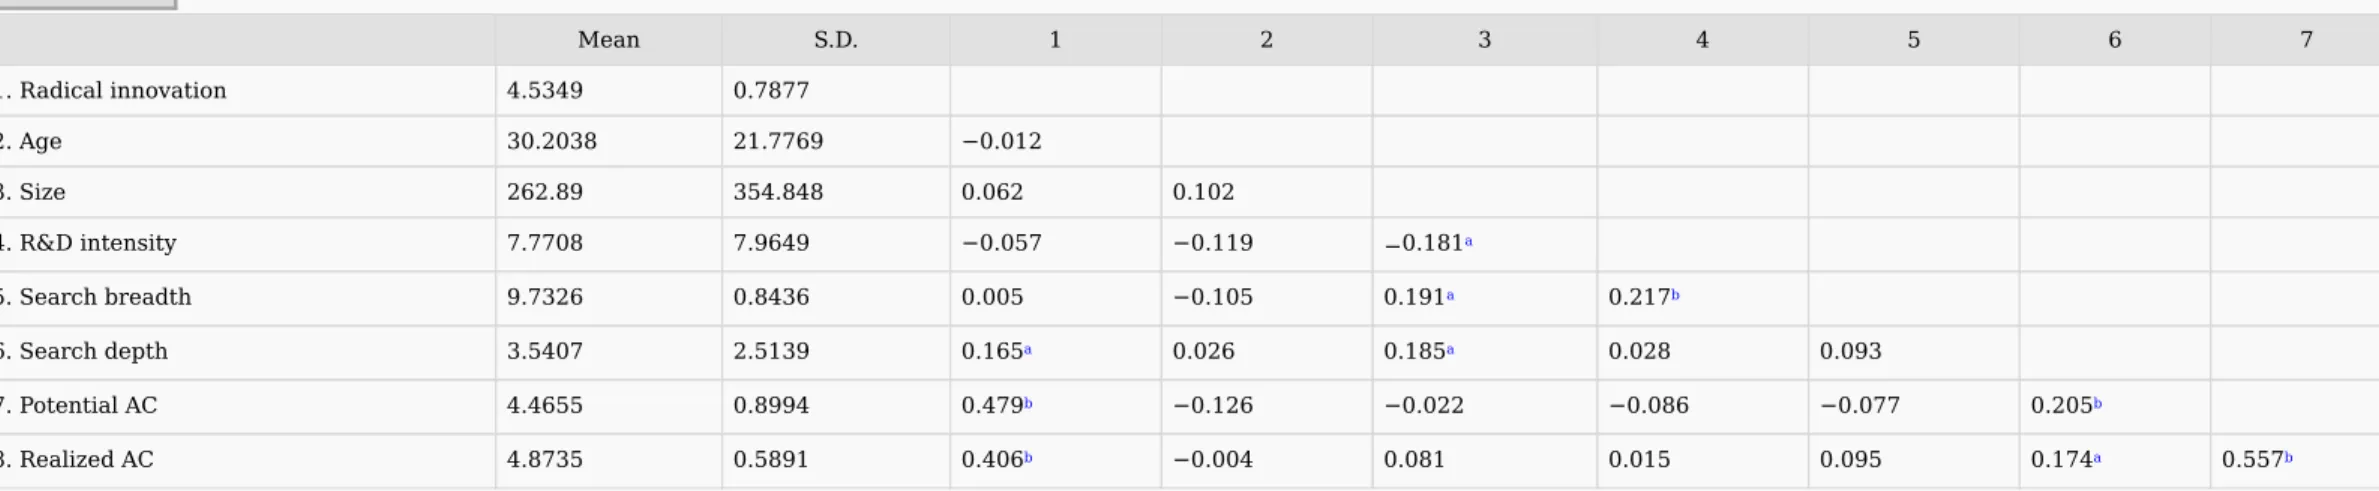 Table	 4	 presents	 descriptive	 statistics	 and	 correlations	 for	 the	 study	 variables.	 The	 correlations	 indicate	 that	 potential	 and	 realized	 AC	 are	 positively	 related	 and	 that	 external	 search	 depth	 is	 positively	 related	 to	 both di